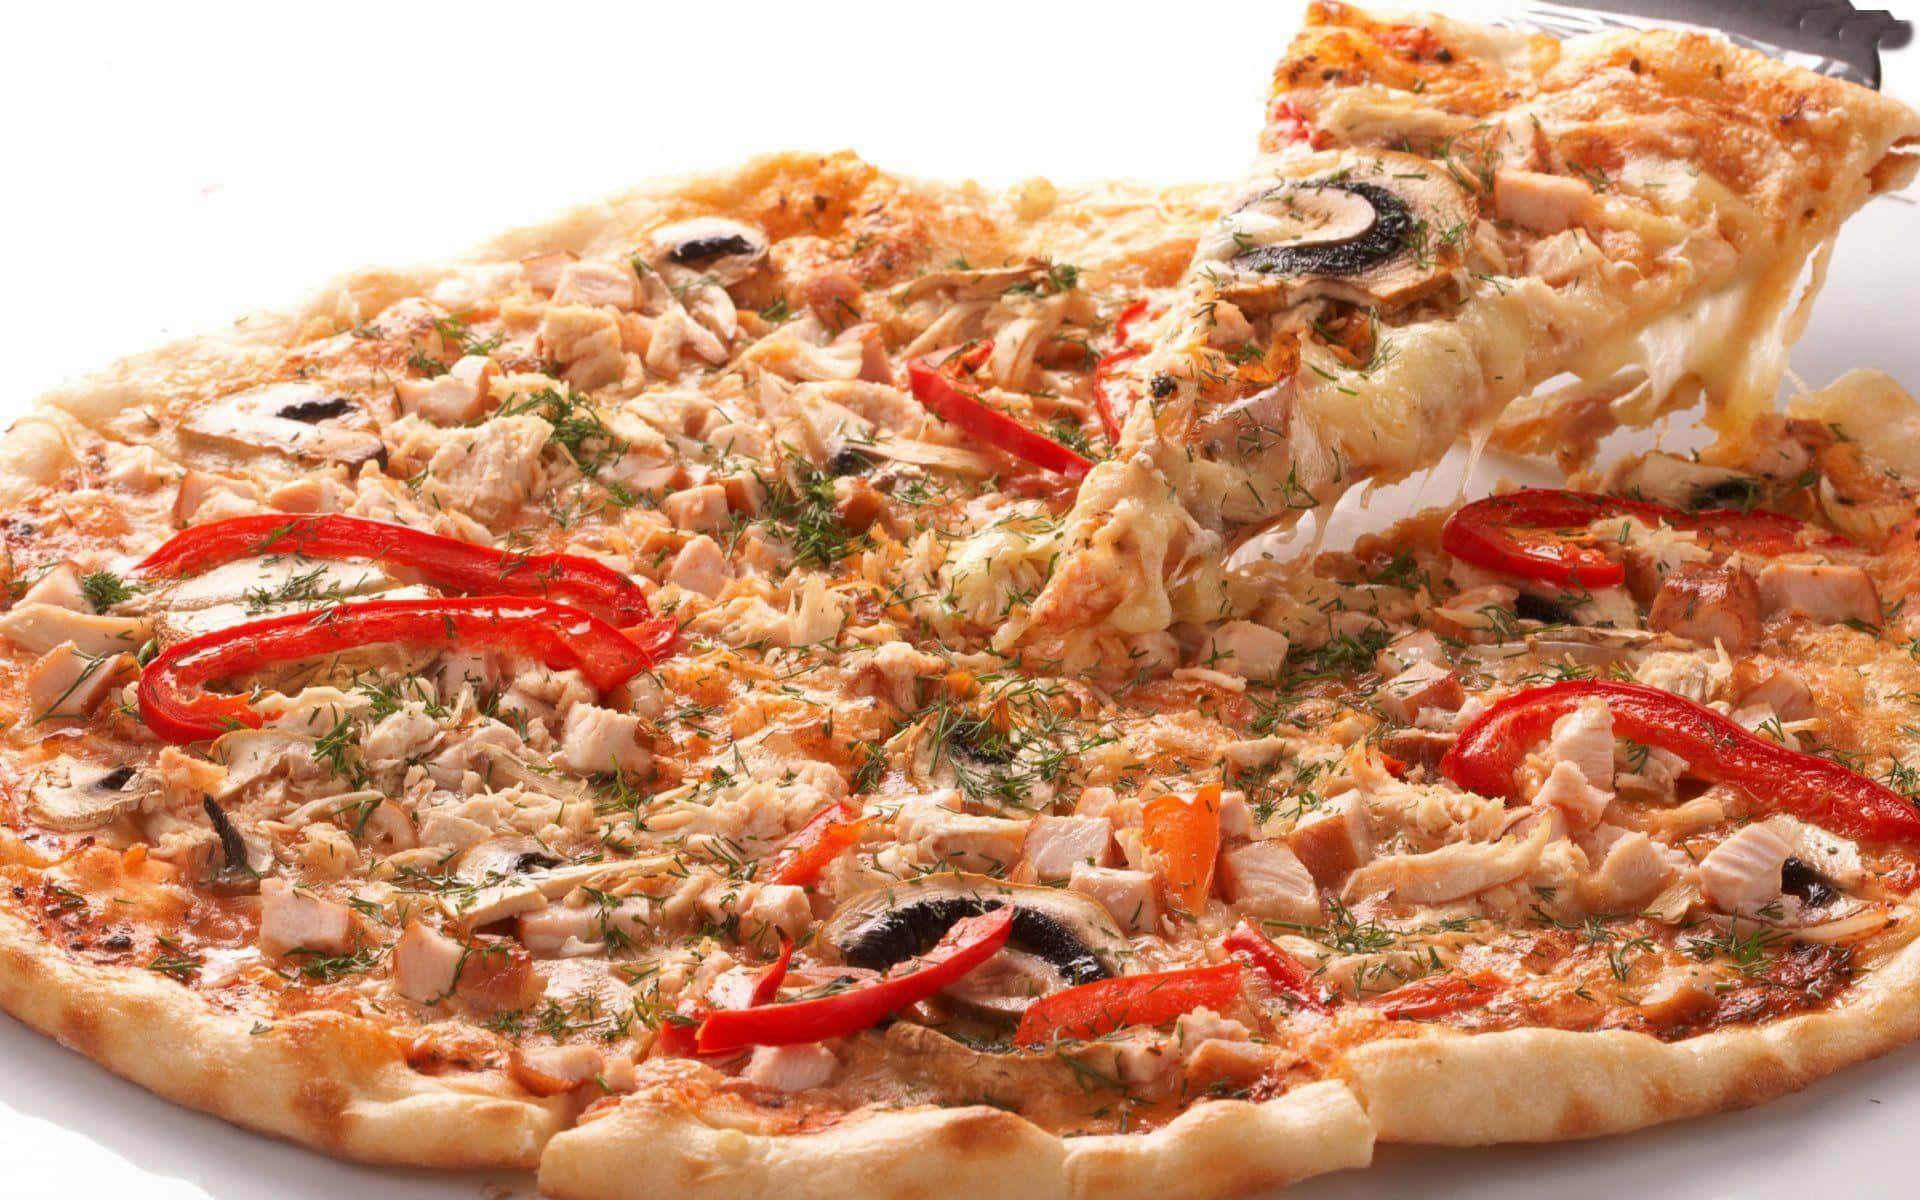 Enjoy Delicious Pizza From Pizza Hut